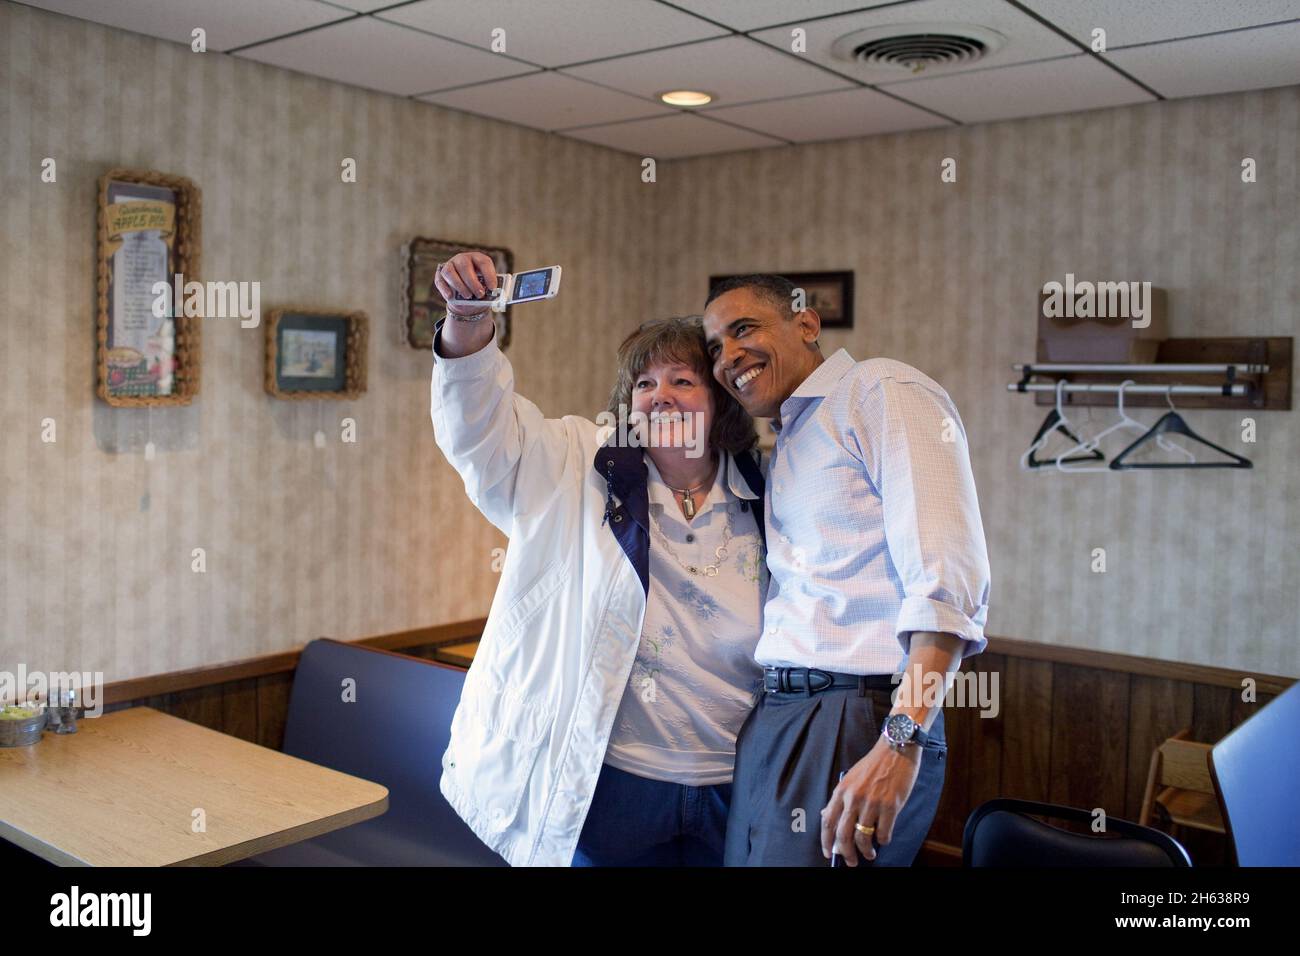 President Barack Obama poses for a photo with a patron at Jerry's Family Restaurant, a diner in Mount Pleasant, Iowa, April 27, 2010. Stock Photo